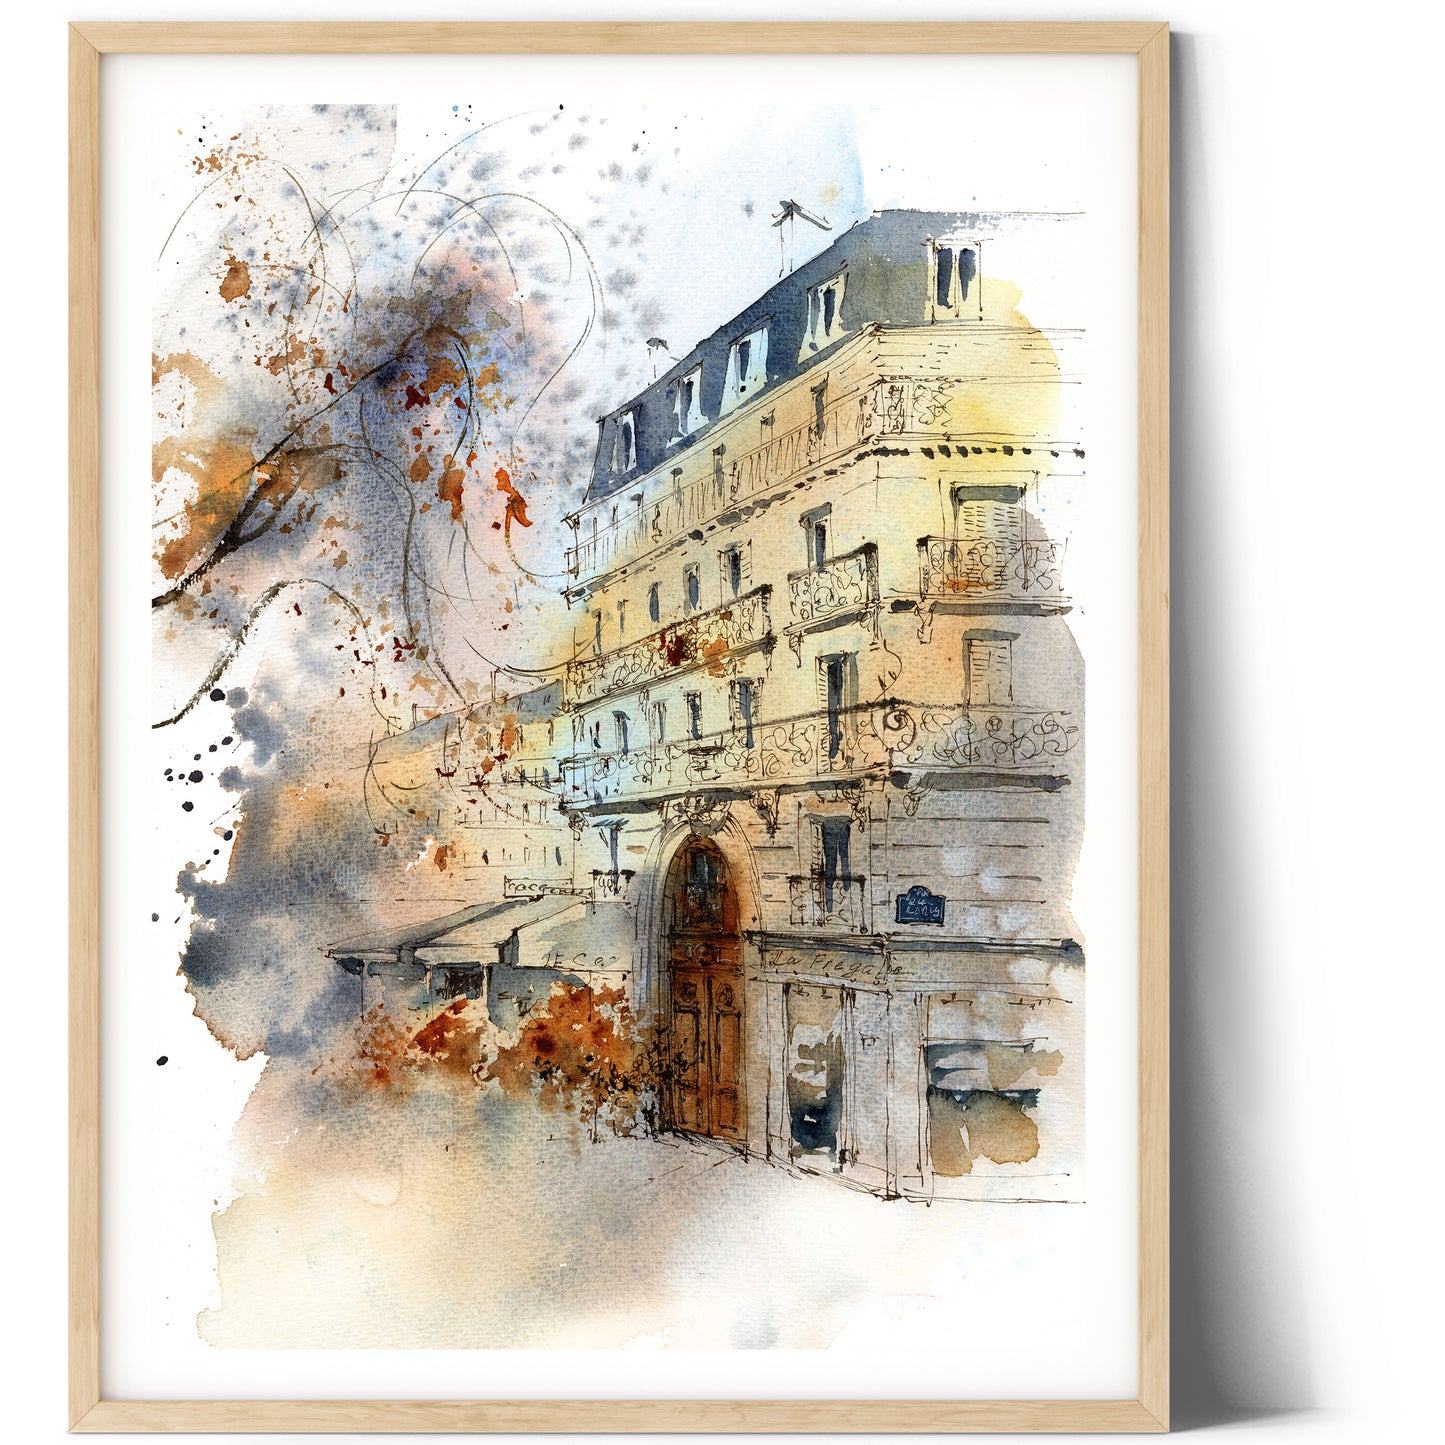 Autumn in Paris: Charming Street Art Prints from Watercolor Painting